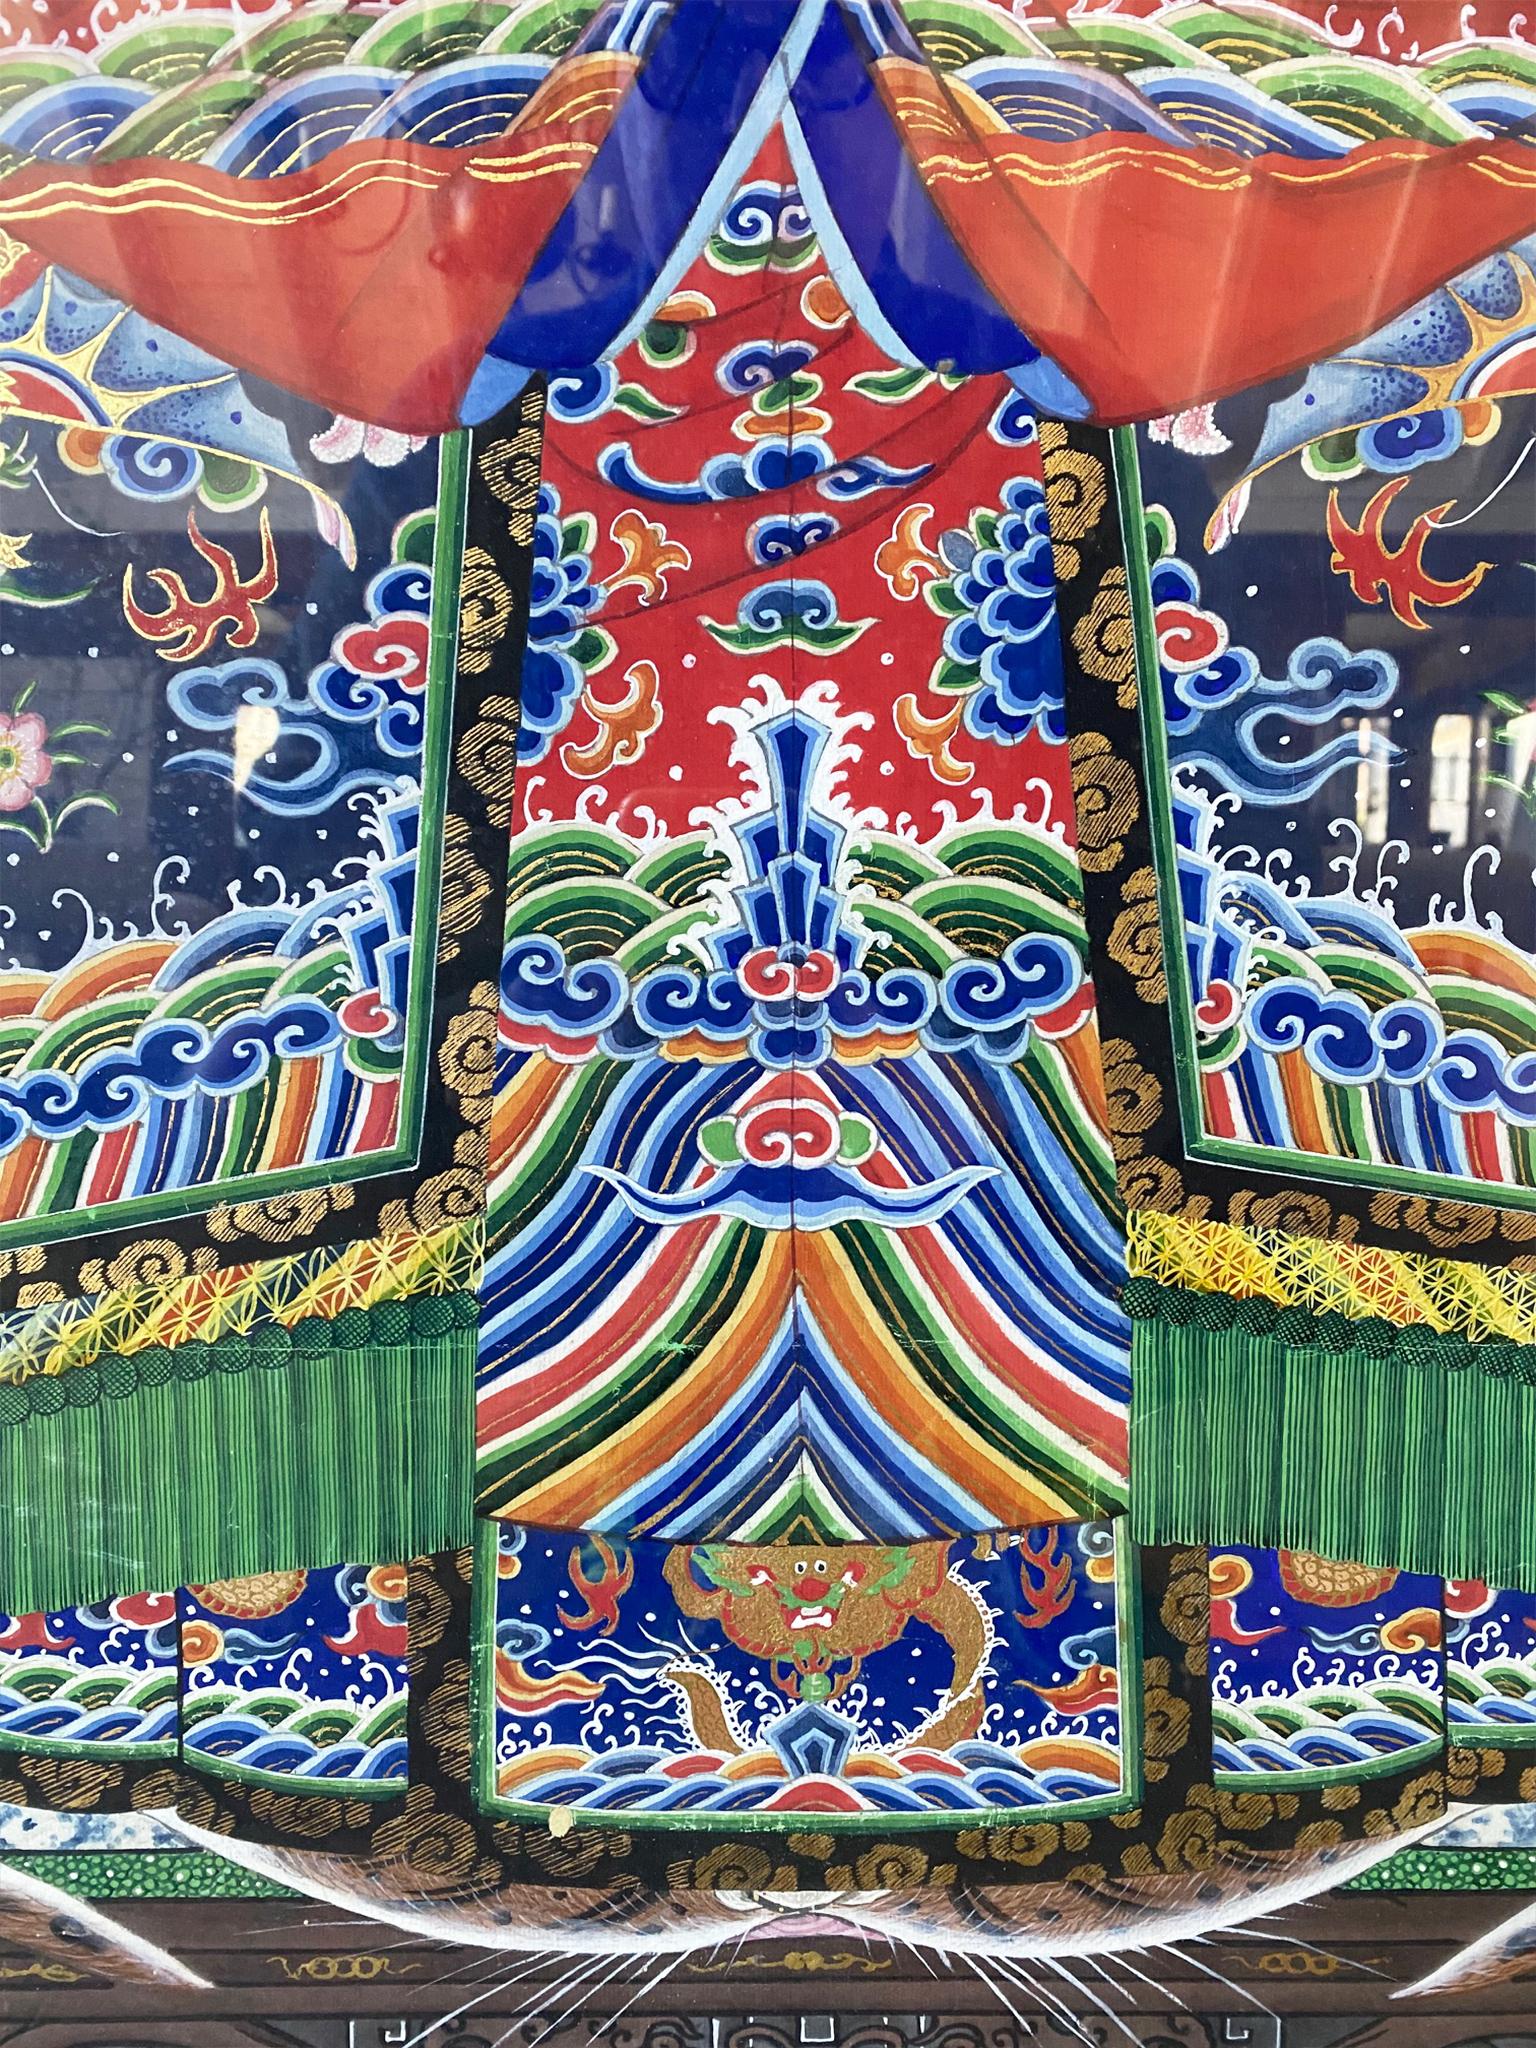 Pair of 19th Century Chinese Ancestral Portraits, Qing Dynasty Era 1